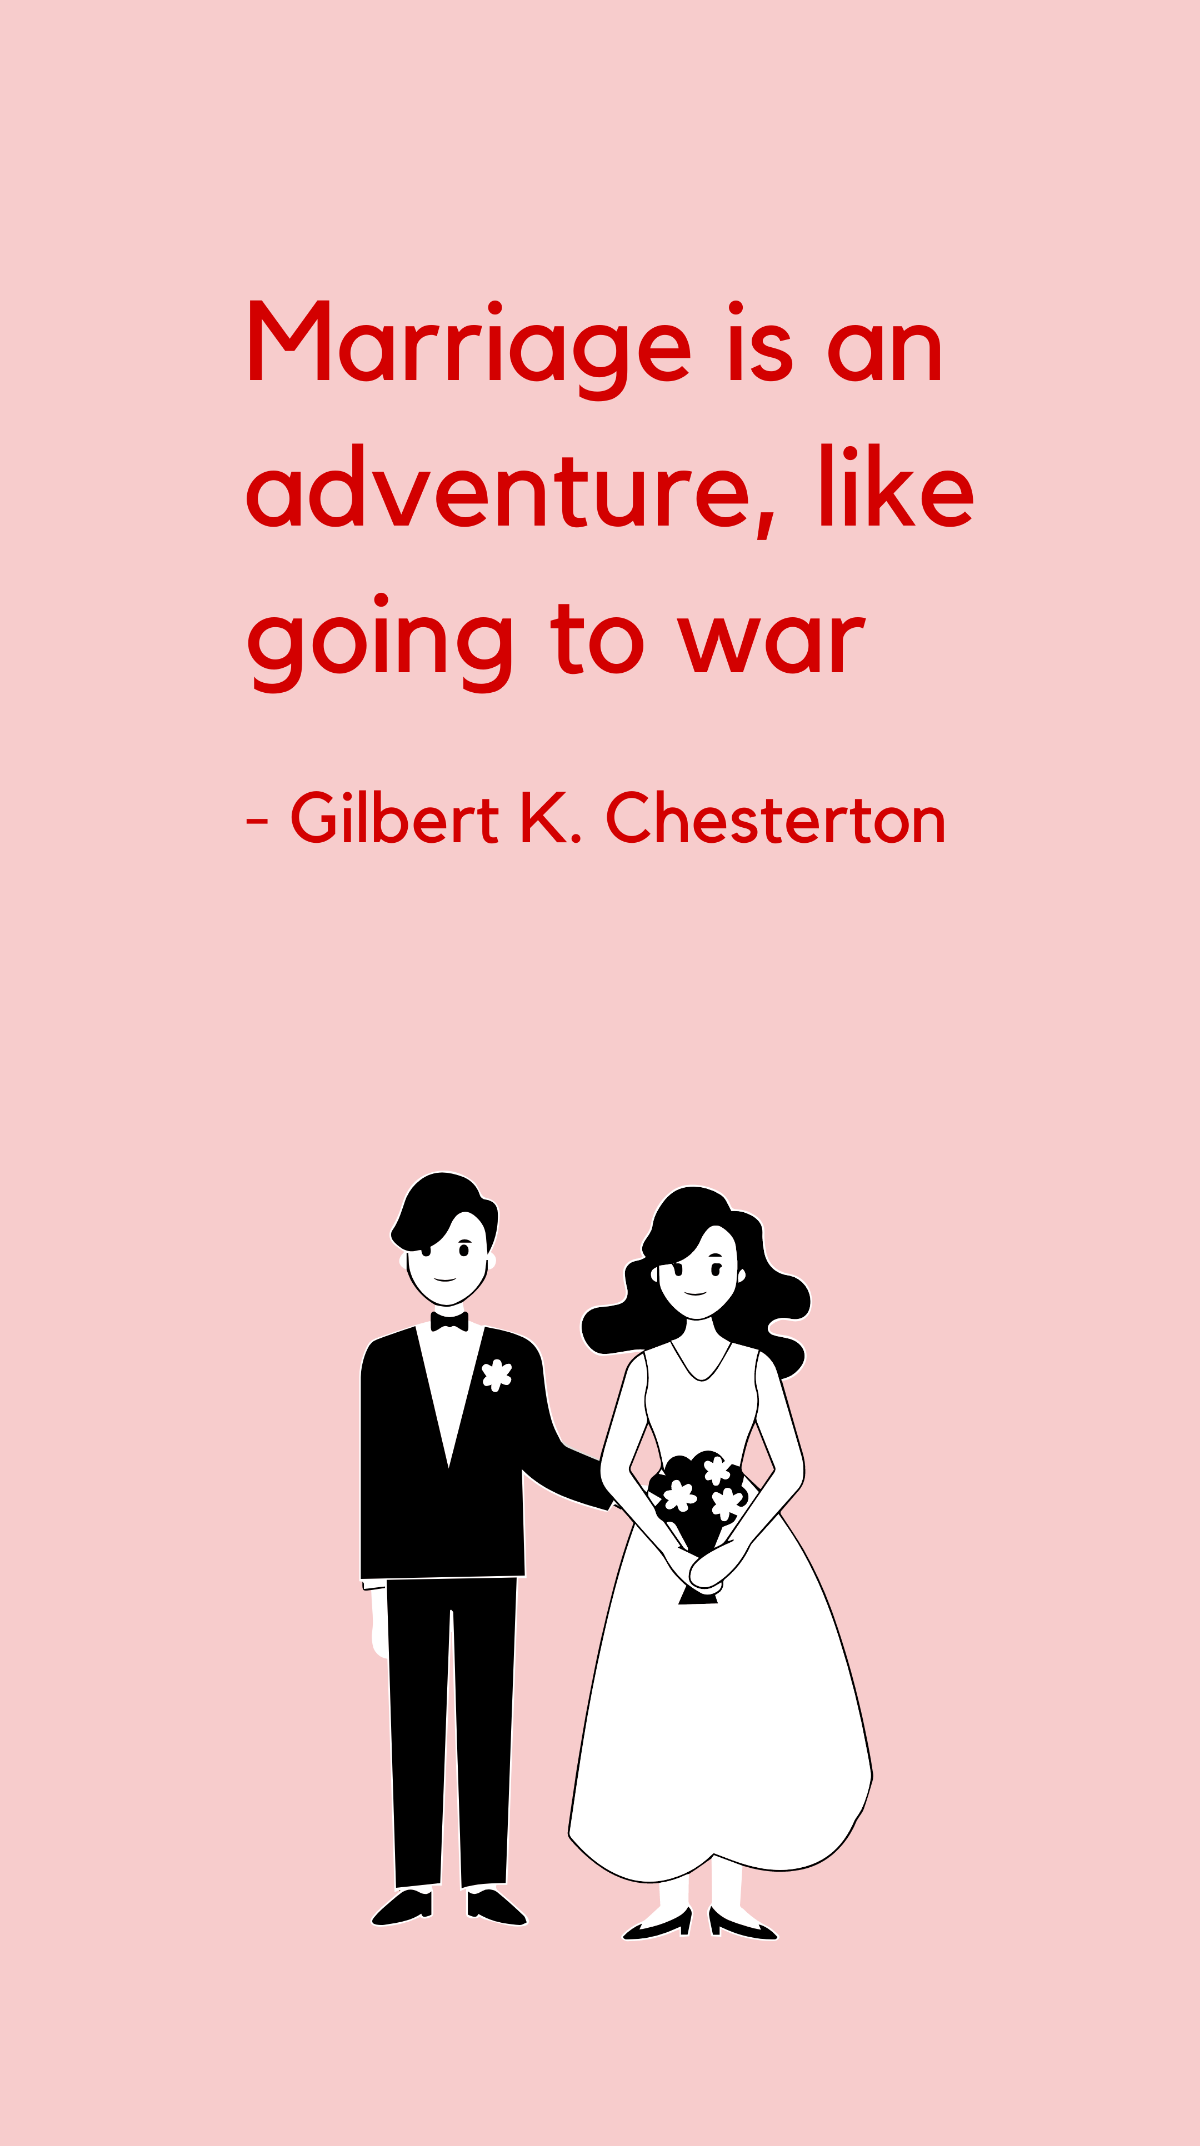 Gilbert K. Chesterton - Marriage is an adventure, like going to war Template